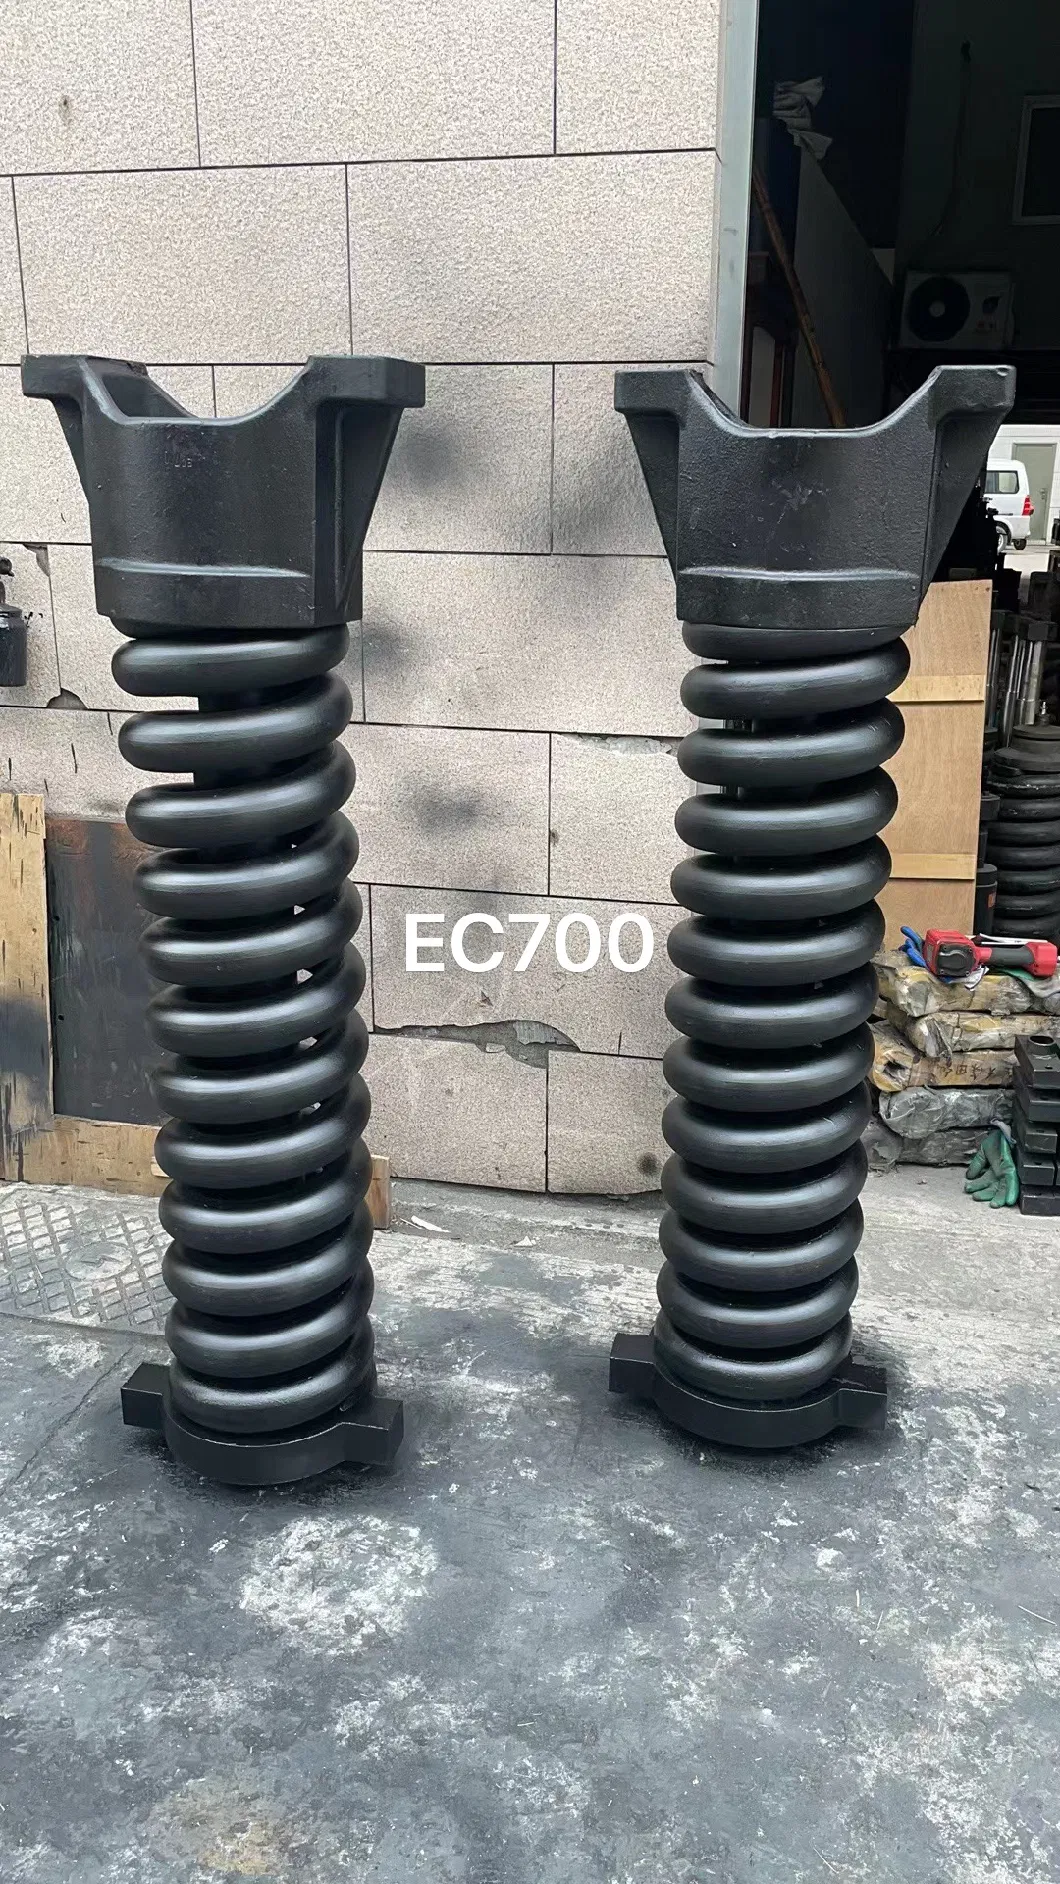 Track Adjuster Assembly Industrial Fast Delivery Dozer Undercarriage Excavator Recoil Springs Cylinder